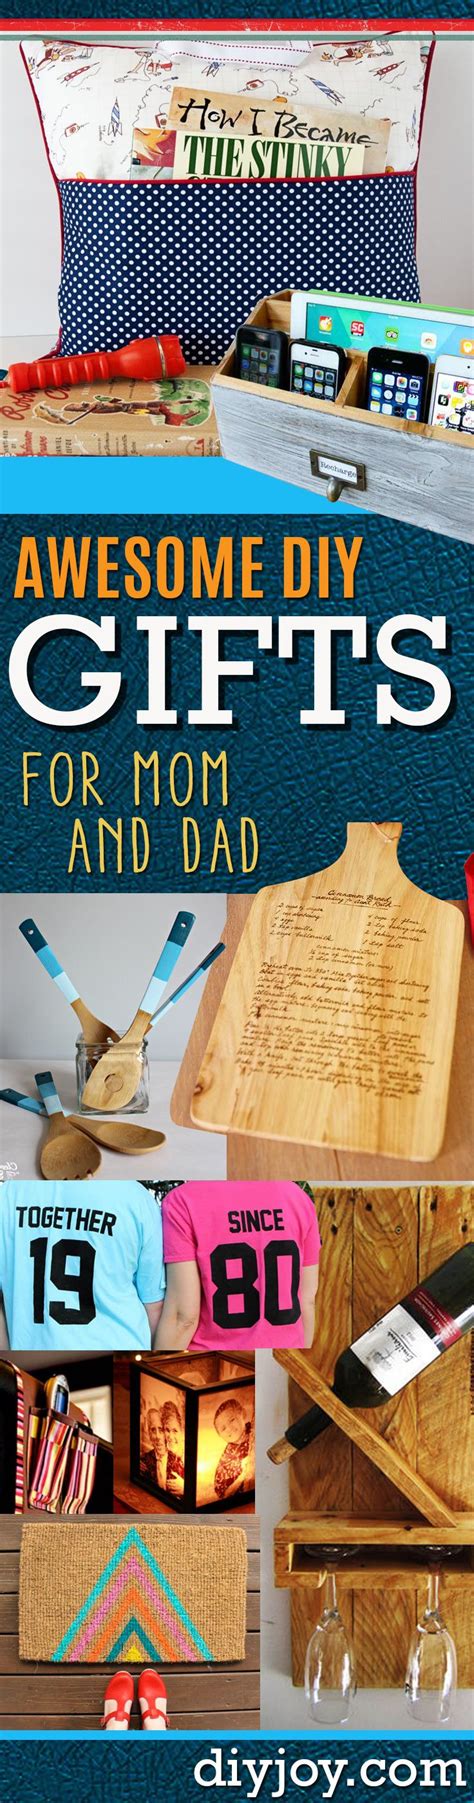 awesome diy t ideas mom and dad will love diy t ideas diy ts for mom christmas